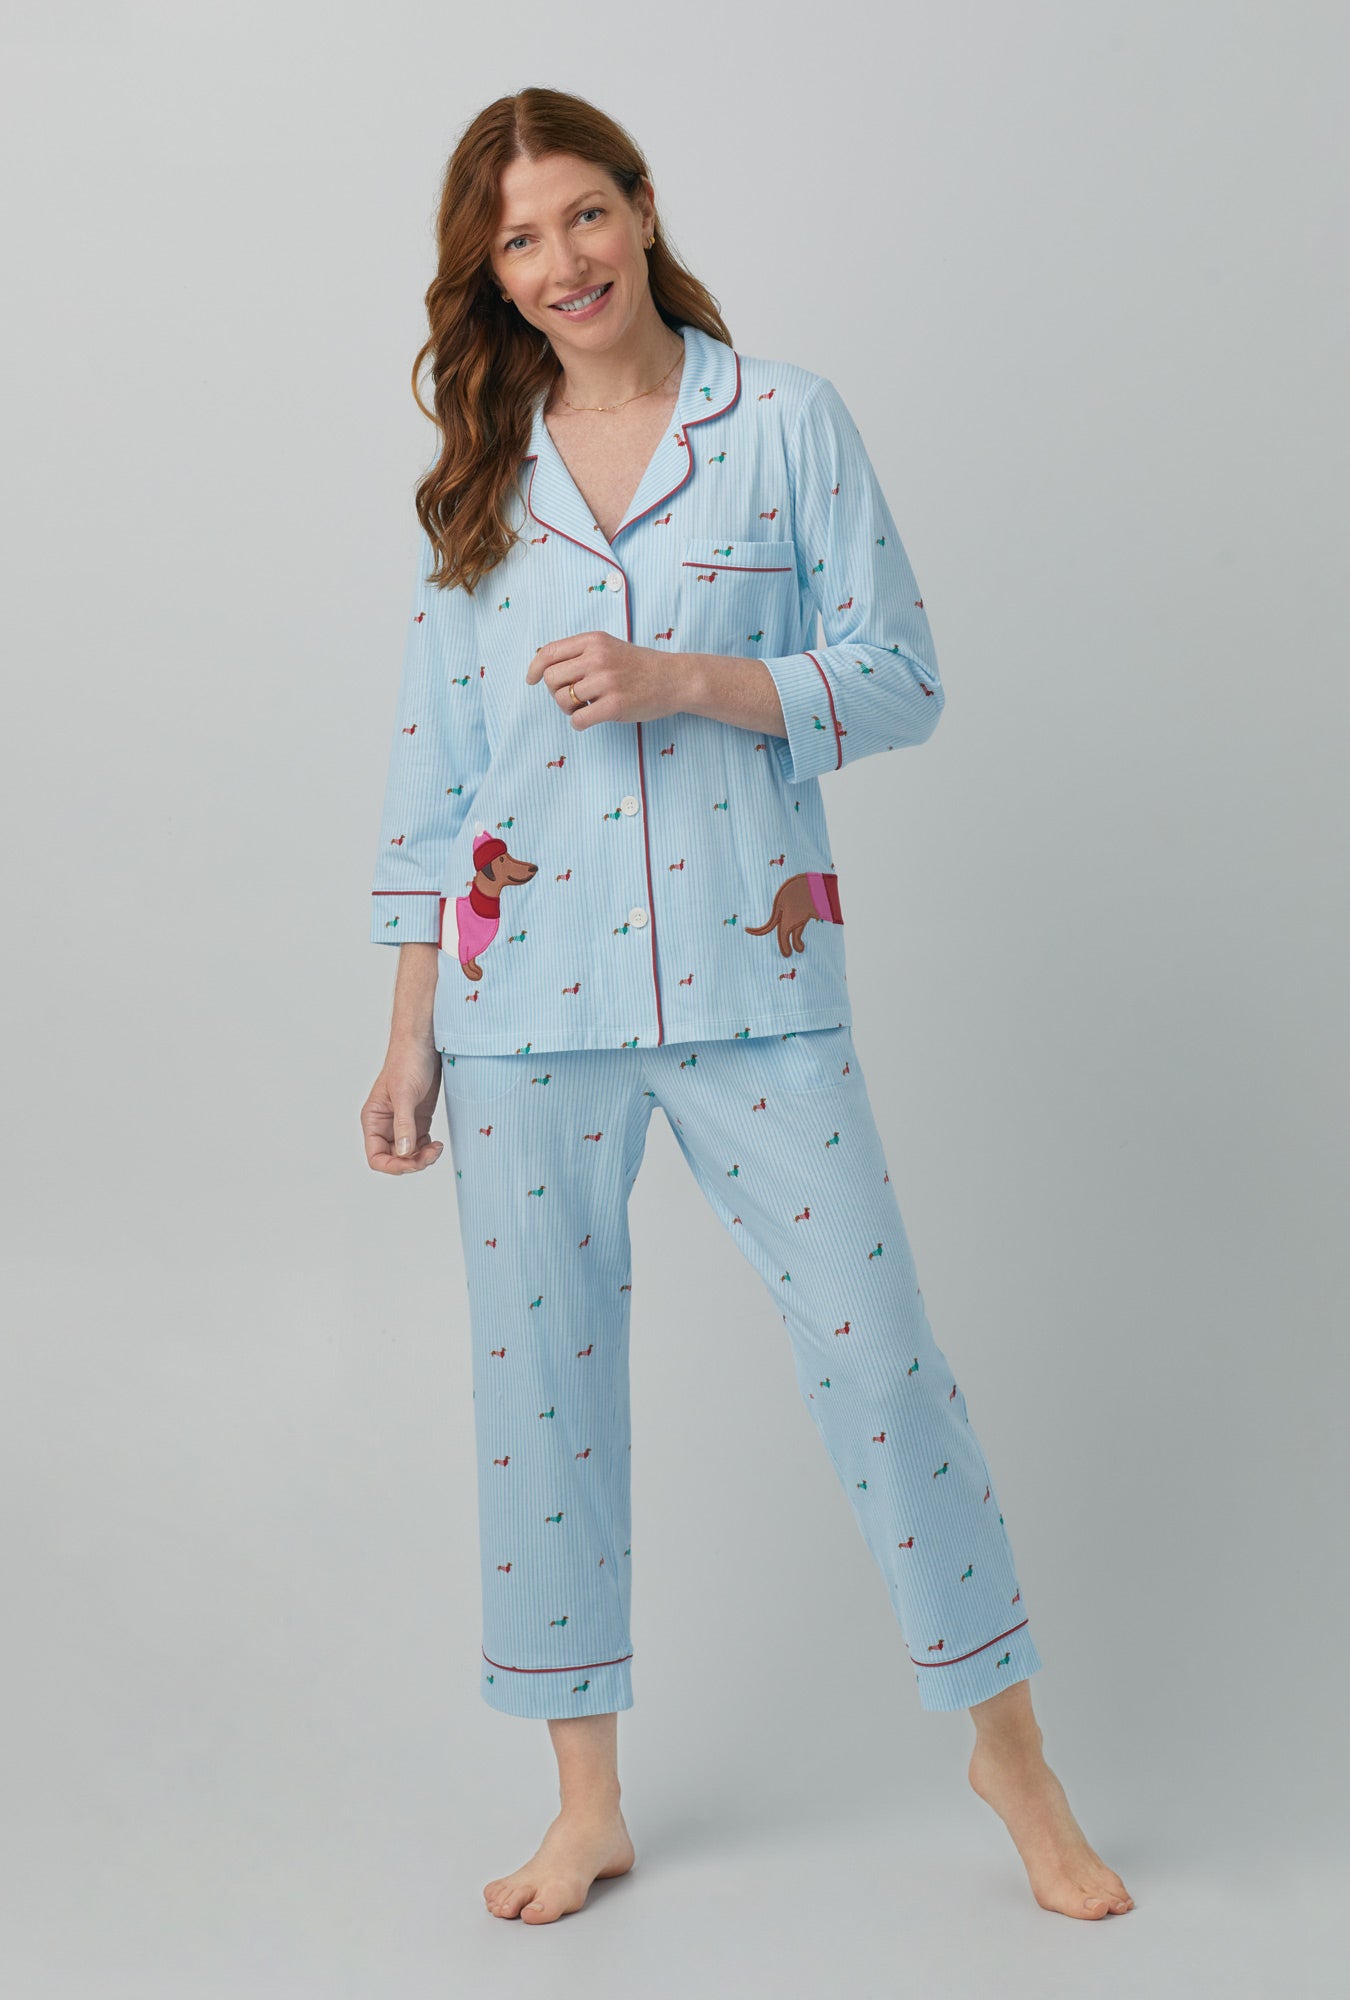 A lady wearing light blue3/4 Sleeve Classic Stretch Jersey Cropped PJ Set with Dach shun print